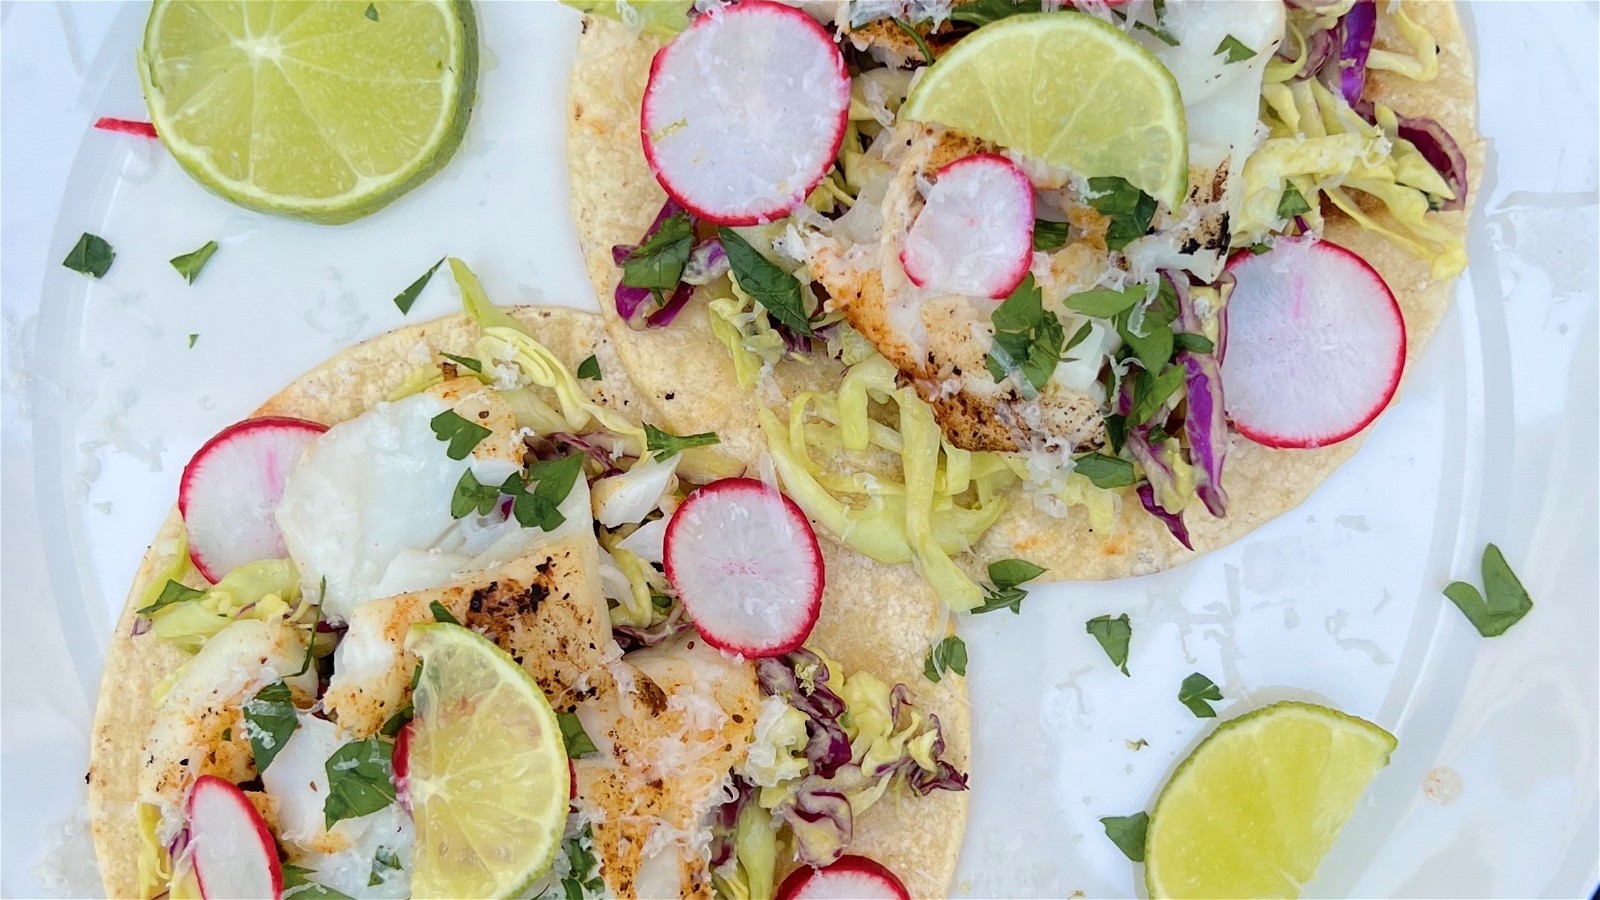 Image of Grilled Fish Tacos with Avocado Slaw